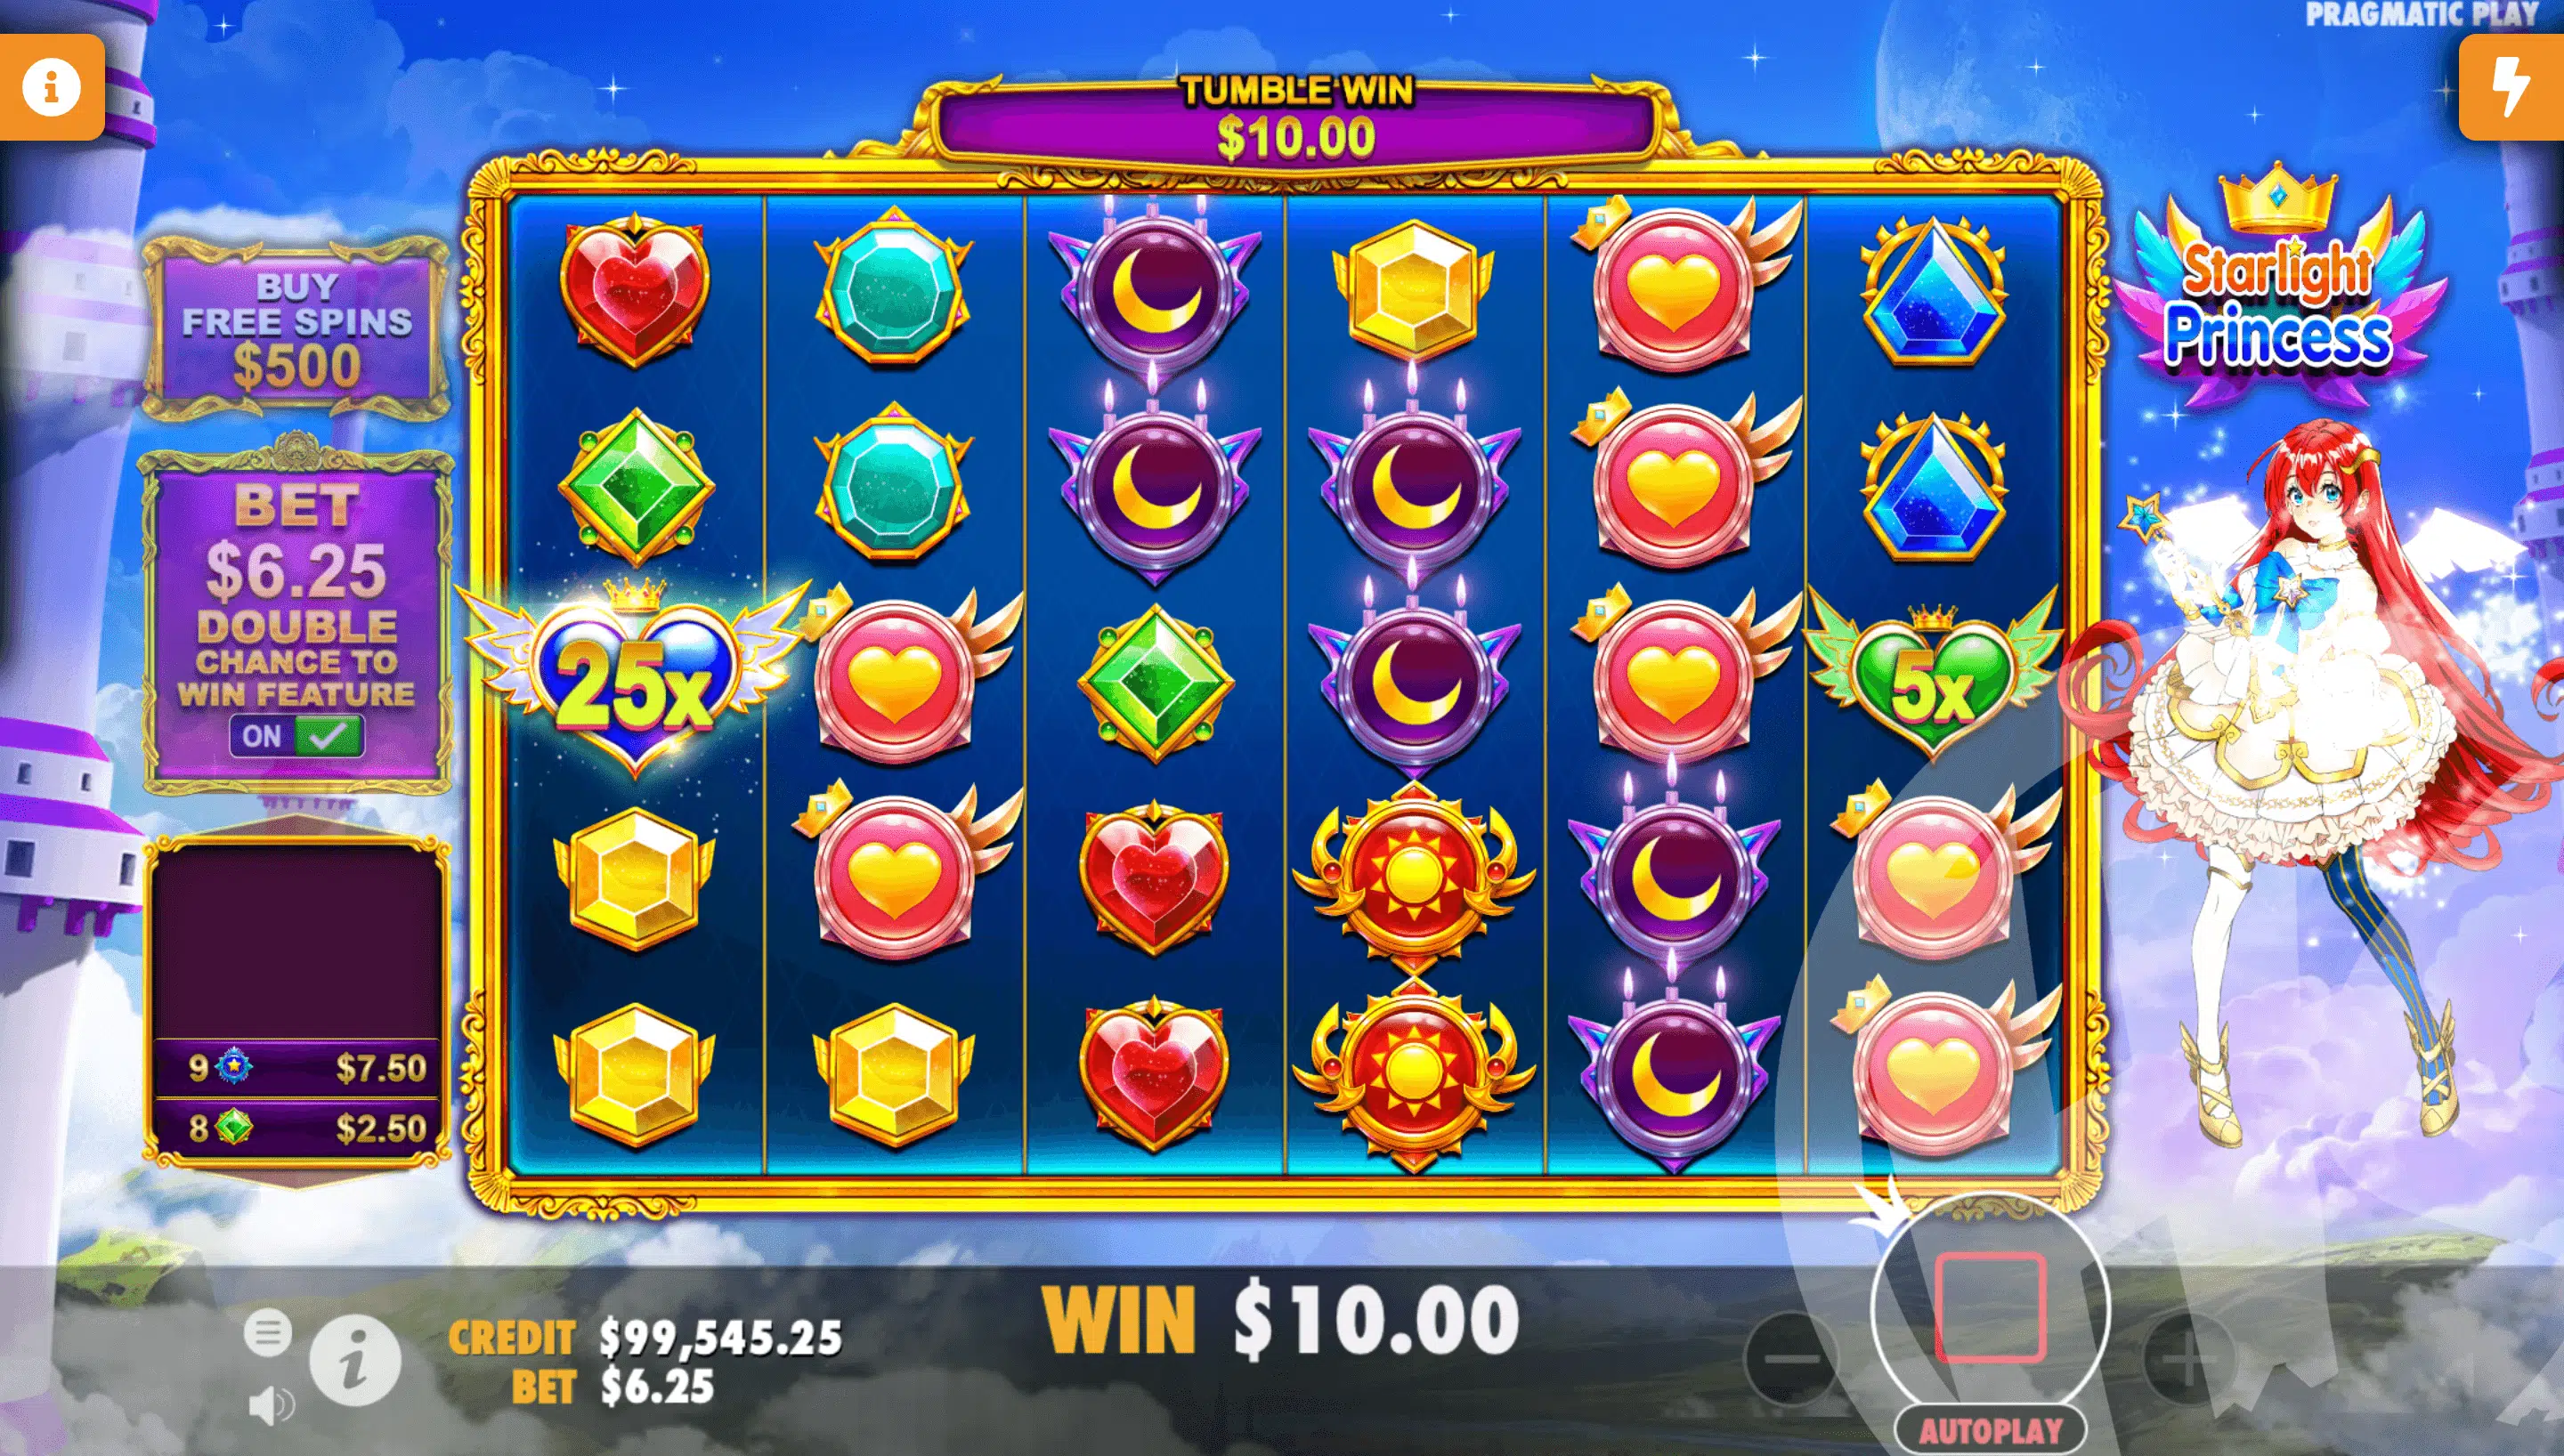 Multipliers Can Appear in The Base Game or Free Spins